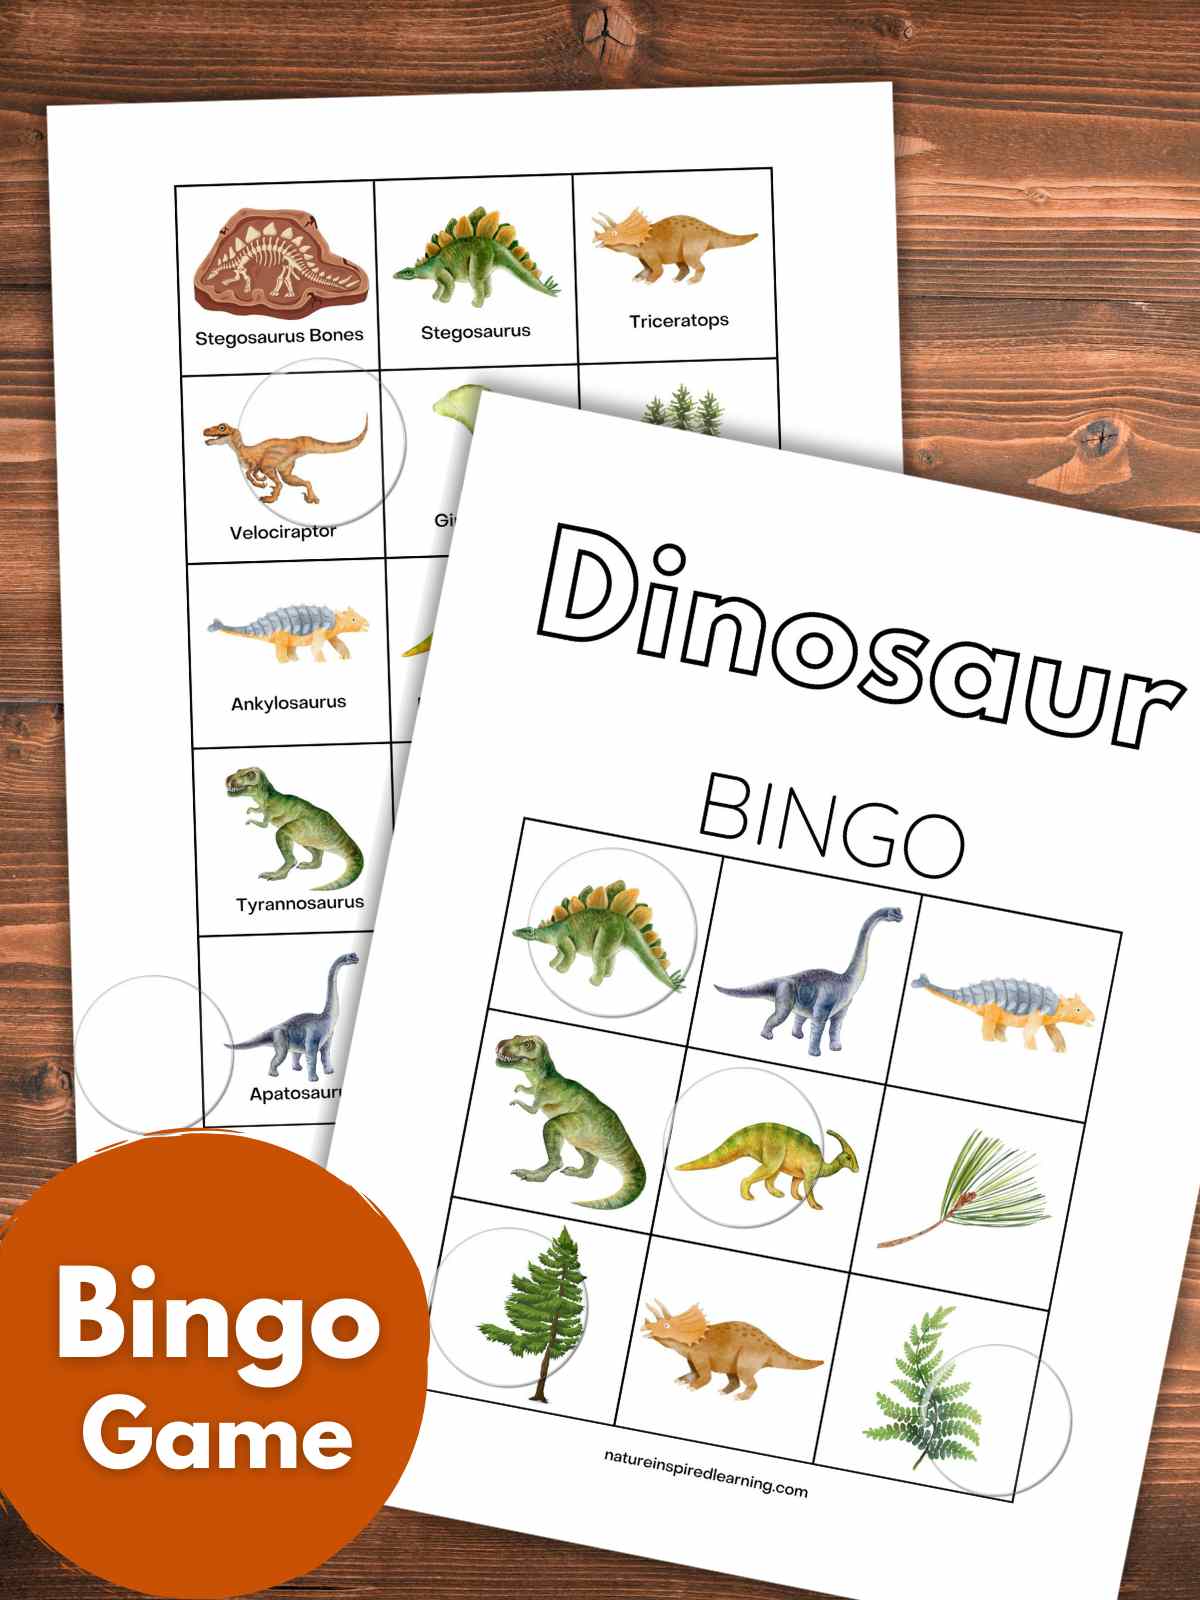 Two printable bingo cards with dinosaur images overlapping each other on a wooden background with an orange circle bottom left with white text overlay. Clear bingo chips on each bingo card.